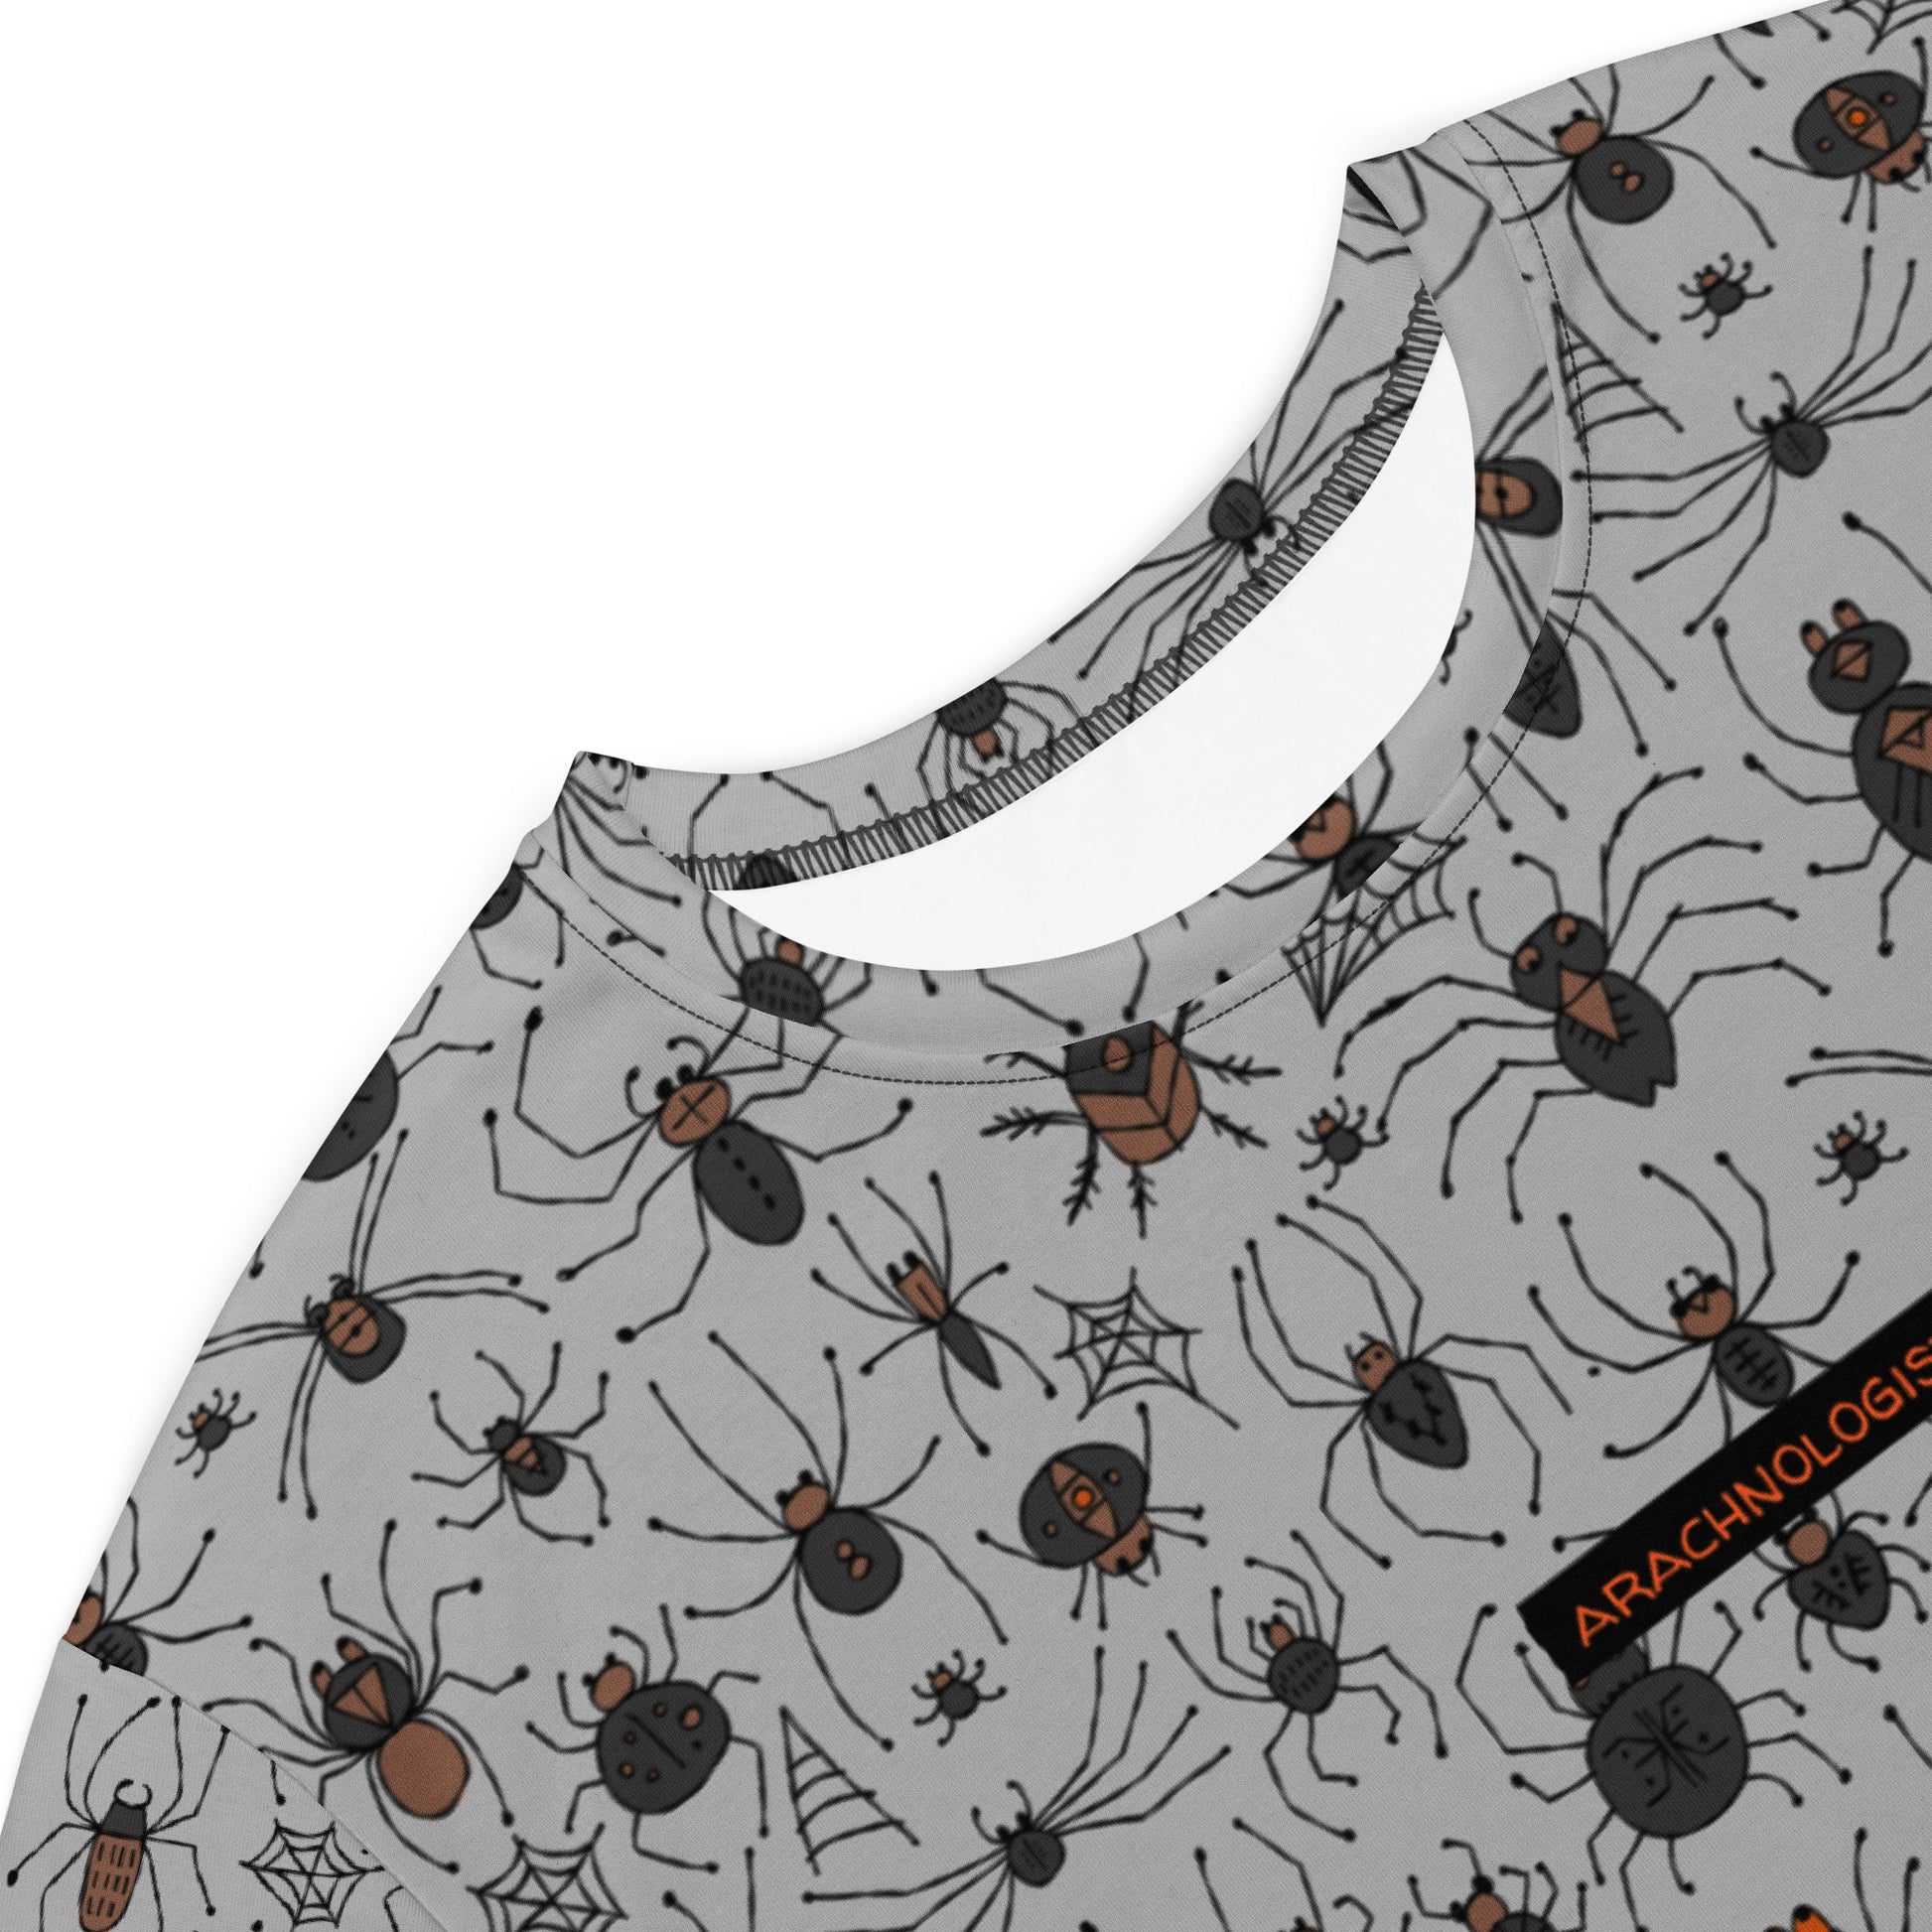 Close-Up T-shirt dress grey color with funny Spiders and personalised text. Basic text - Arachnology